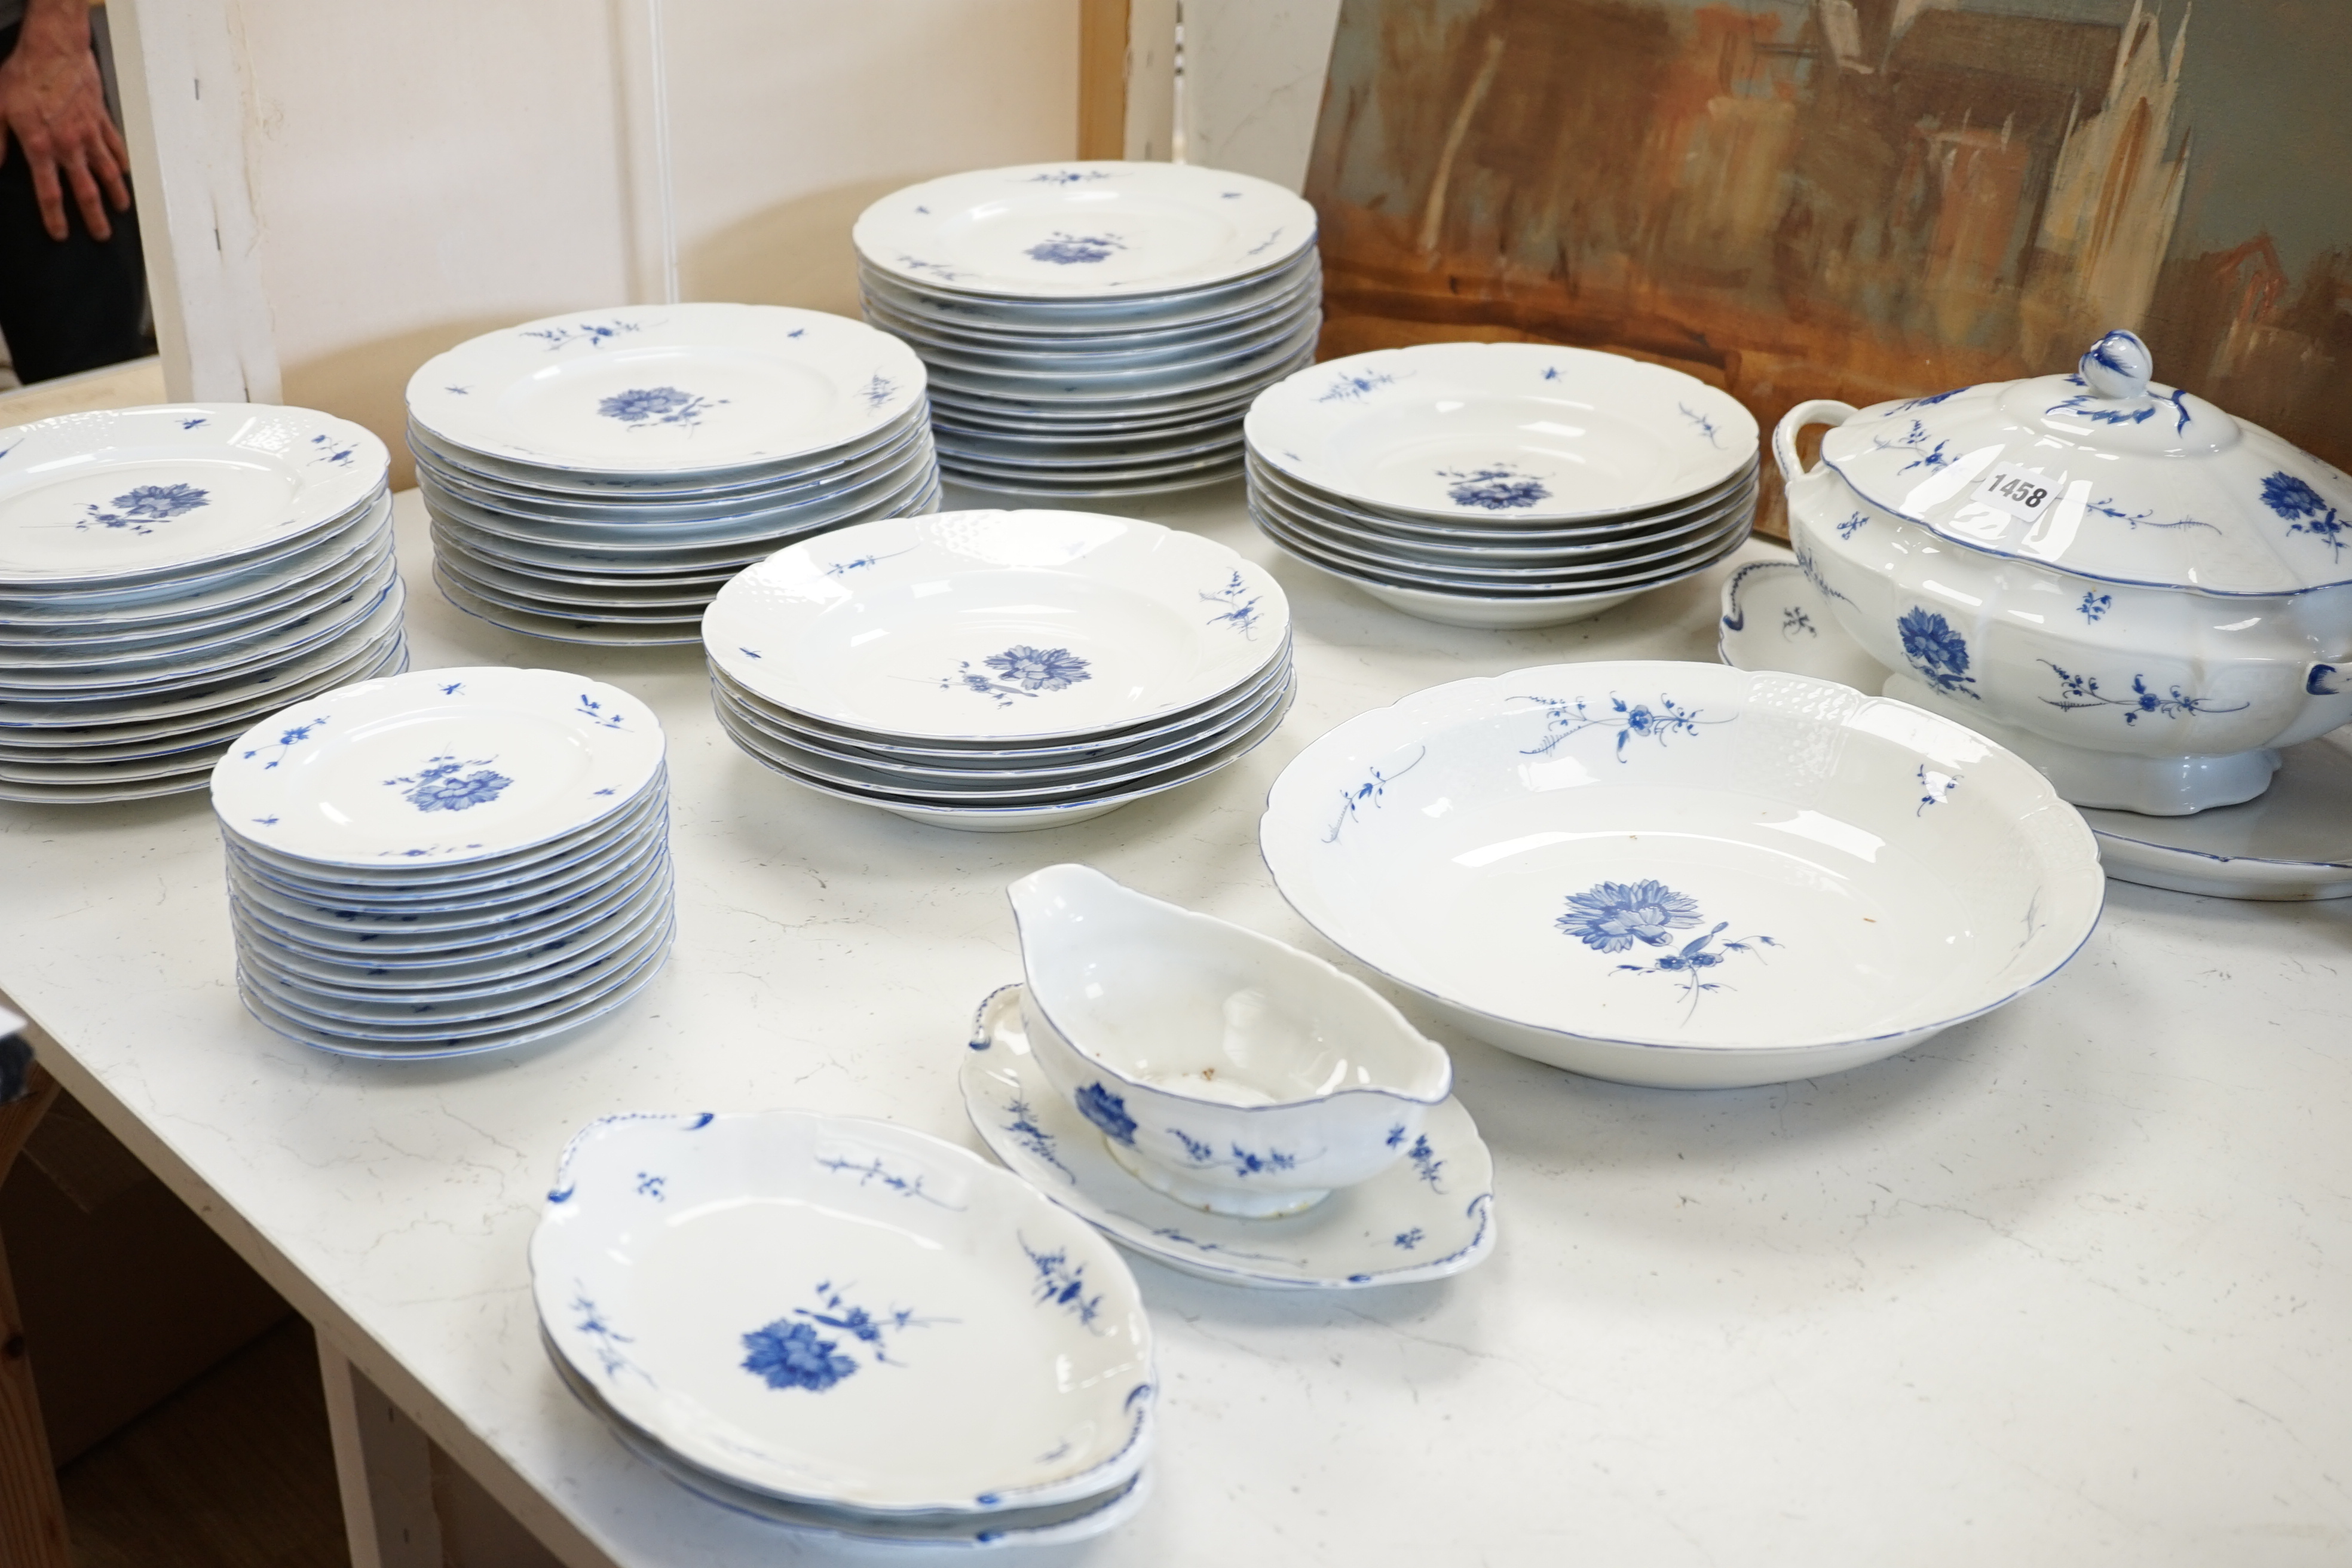 A Chantilly blue and white floral dinner service